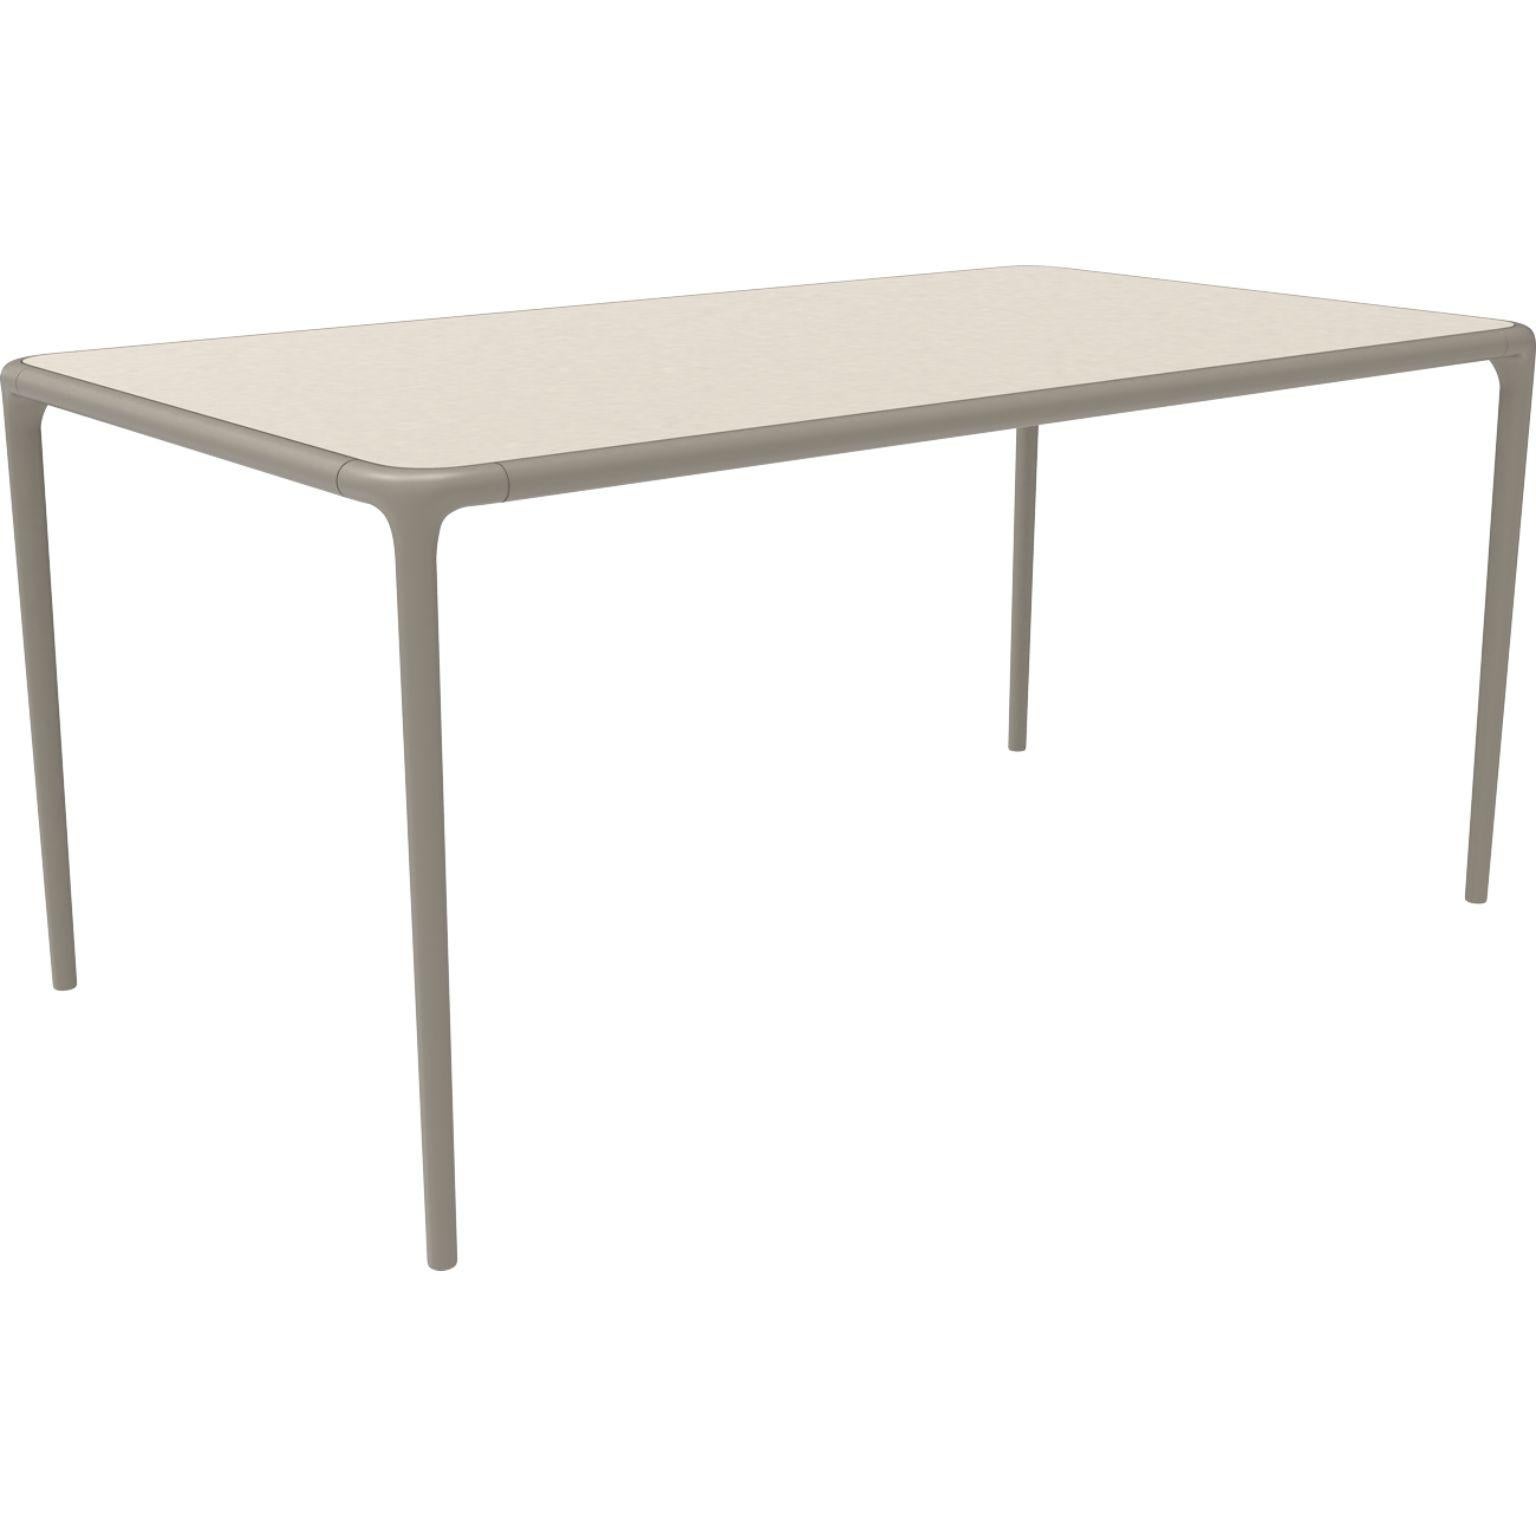 Xaloc cream glass top table 160 by Mowee
Dimensions: D 160 x W 90 x H 74 cm
Material: Aluminum, tinted tempered glass top.
Also available in different aluminum colors and finishes (HPL Black Edge or Neolith).

 Xaloc synthesizes the lines of